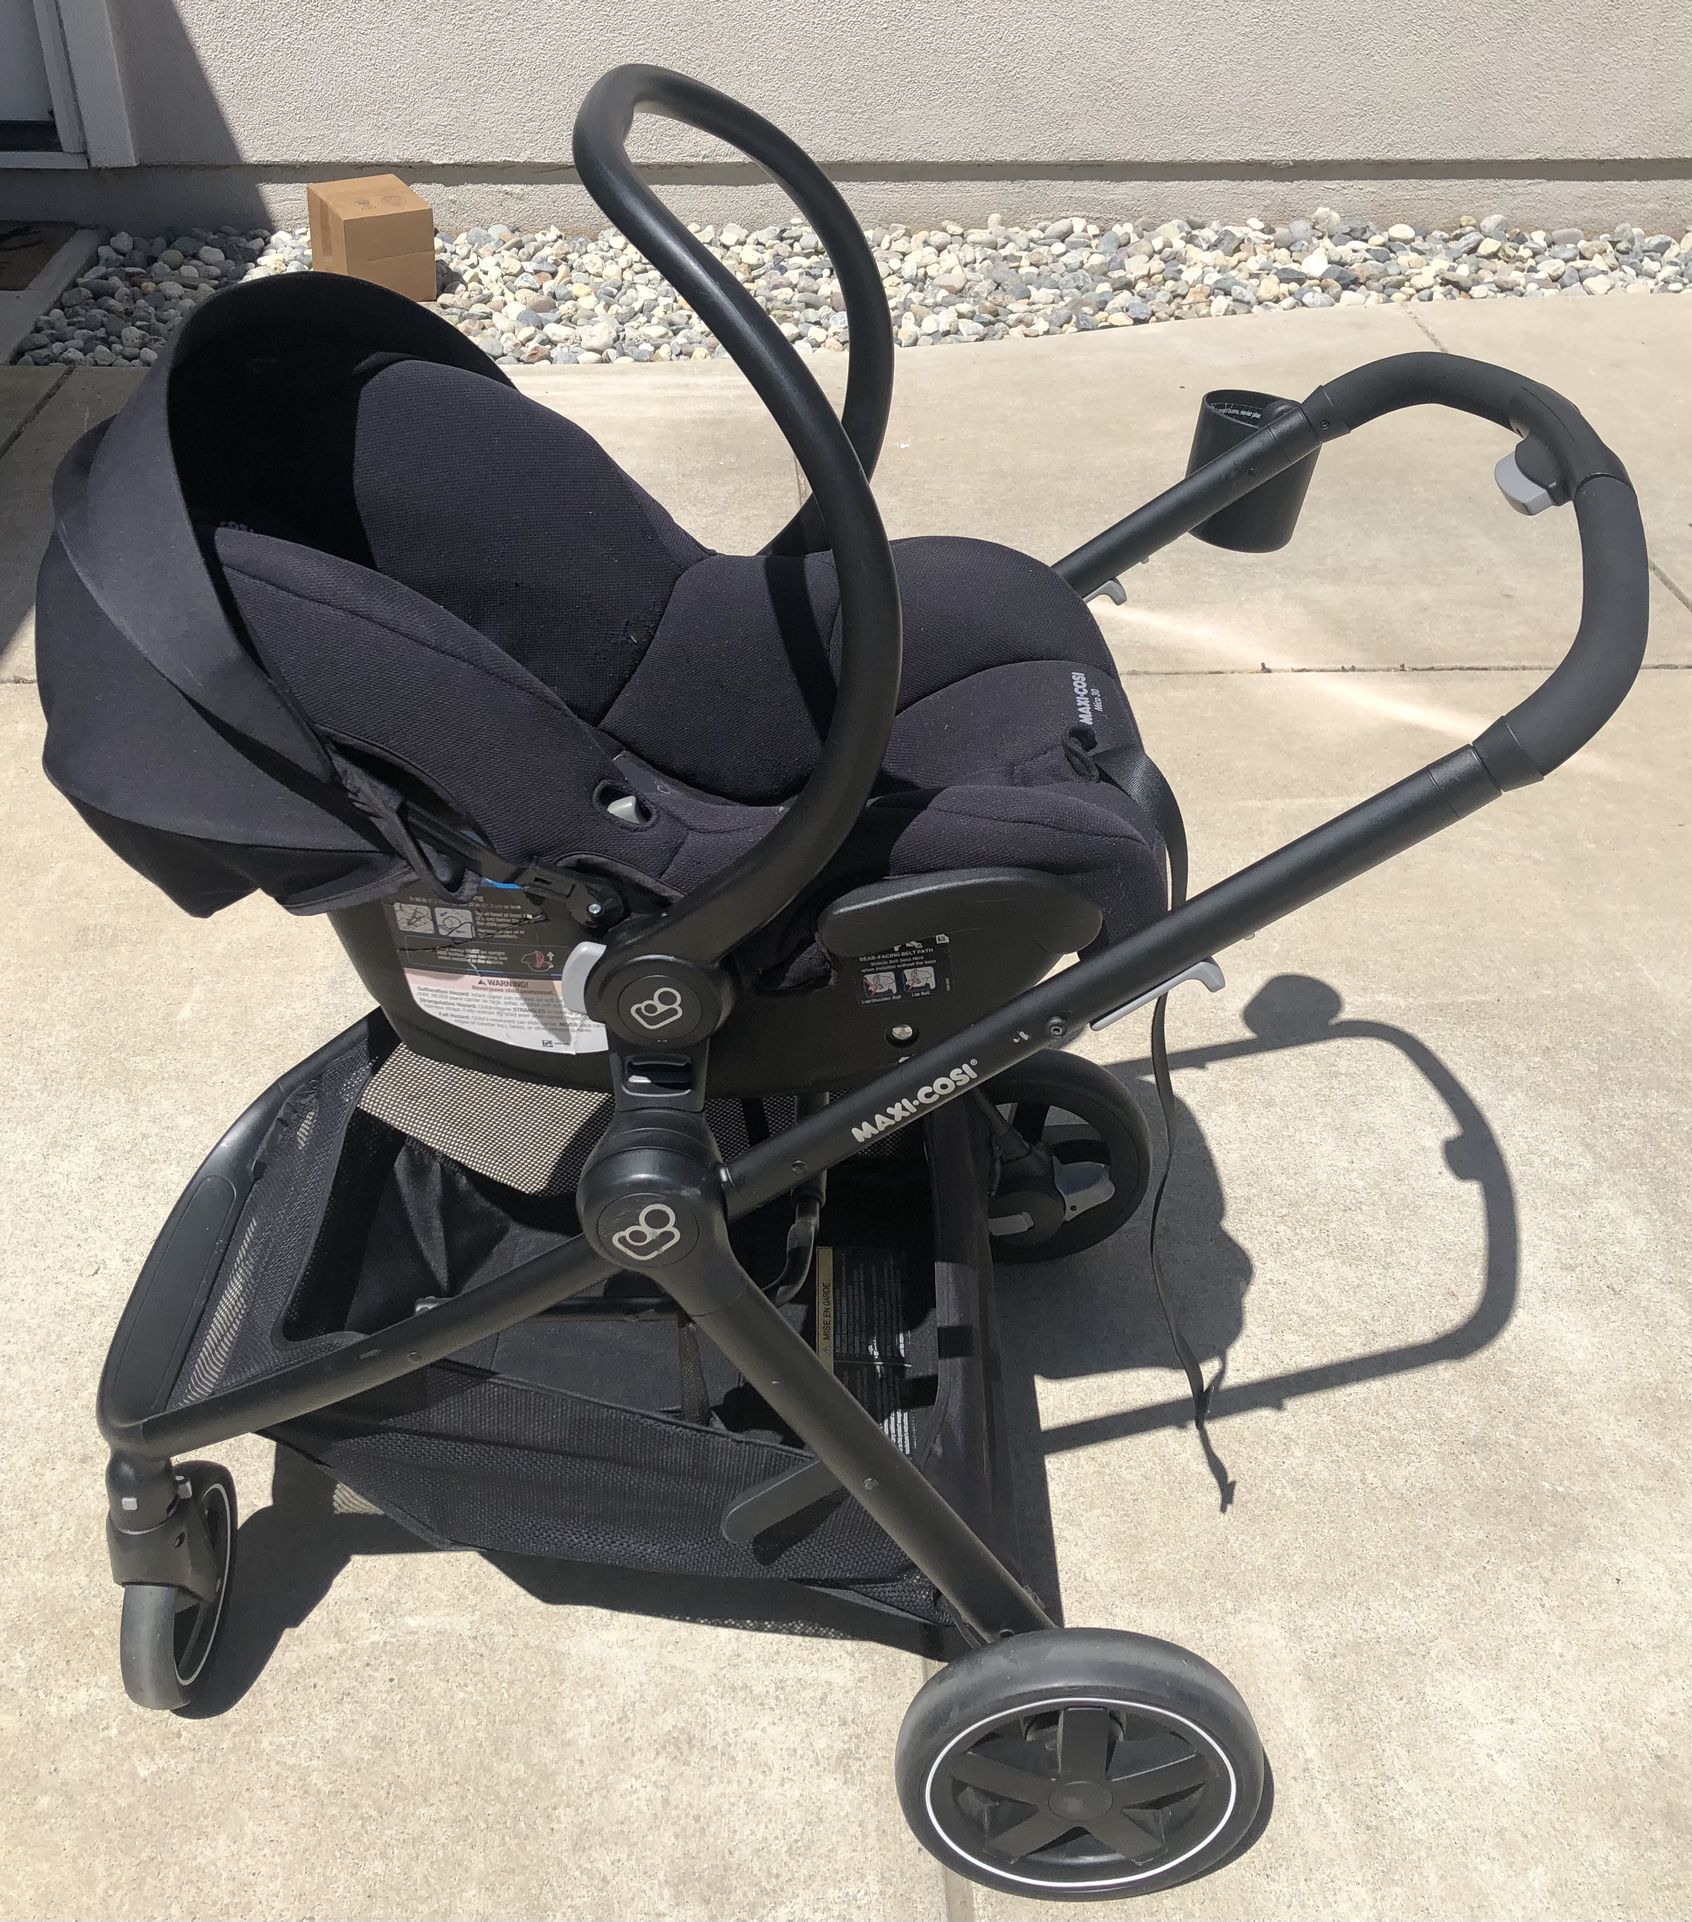 Maxi Cosi Stroller, Baby Car Seat, Bases, and Bassinett